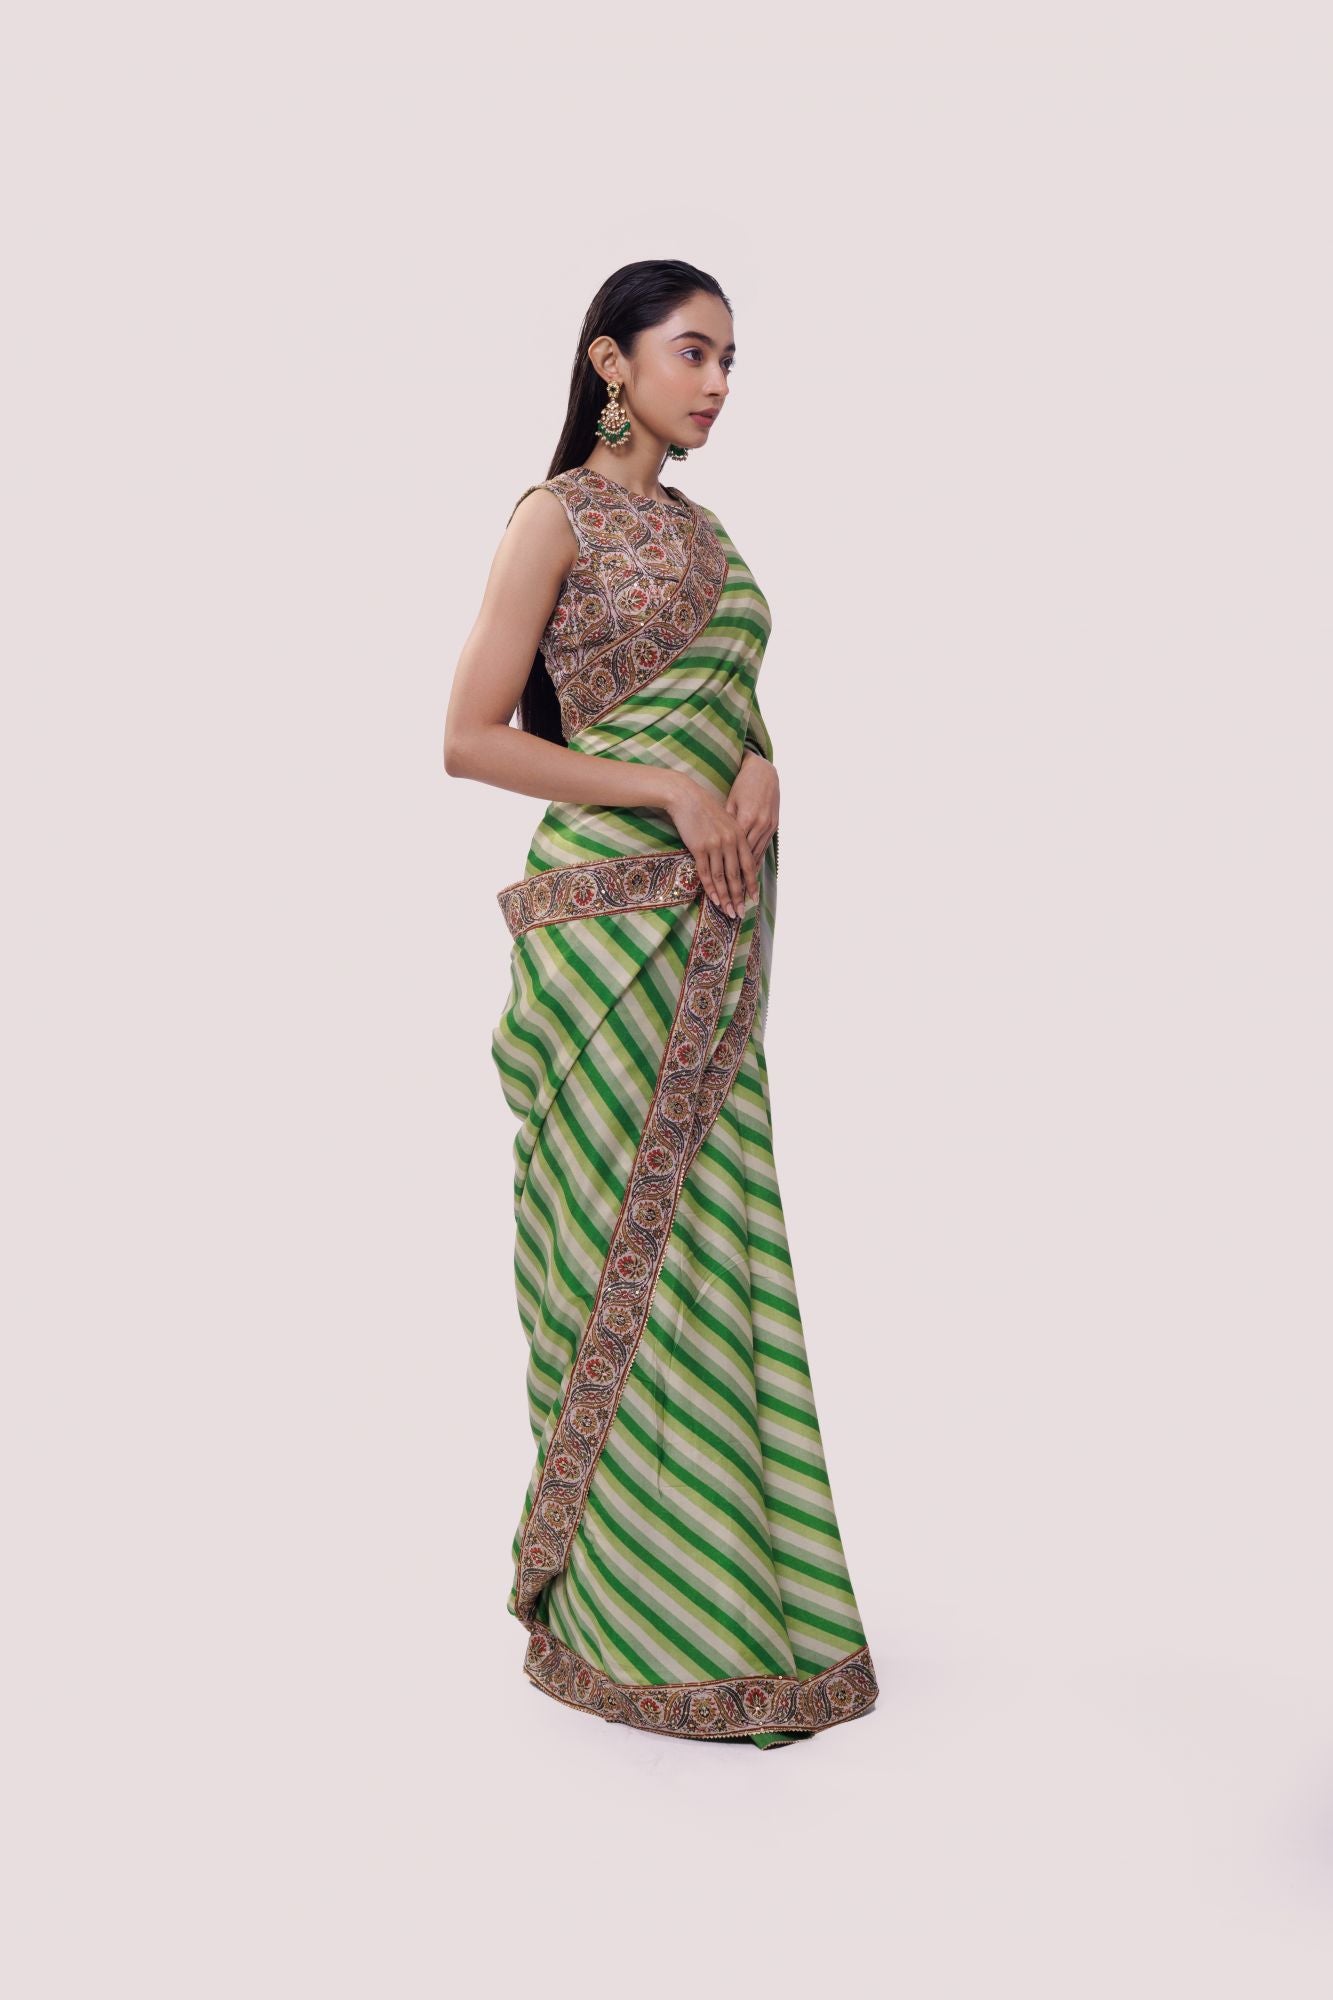 Shop an alluring green satin Saree featuring stripe print and aari work is a perfect choice for parties! It comes with a designer sleeveless saree blouse. Make a fashion statement at weddings with stunning designer sarees, embroidered sarees with blouses, wedding sarees, and handloom sarees from Pure Elegance Indian fashion store in the USA.